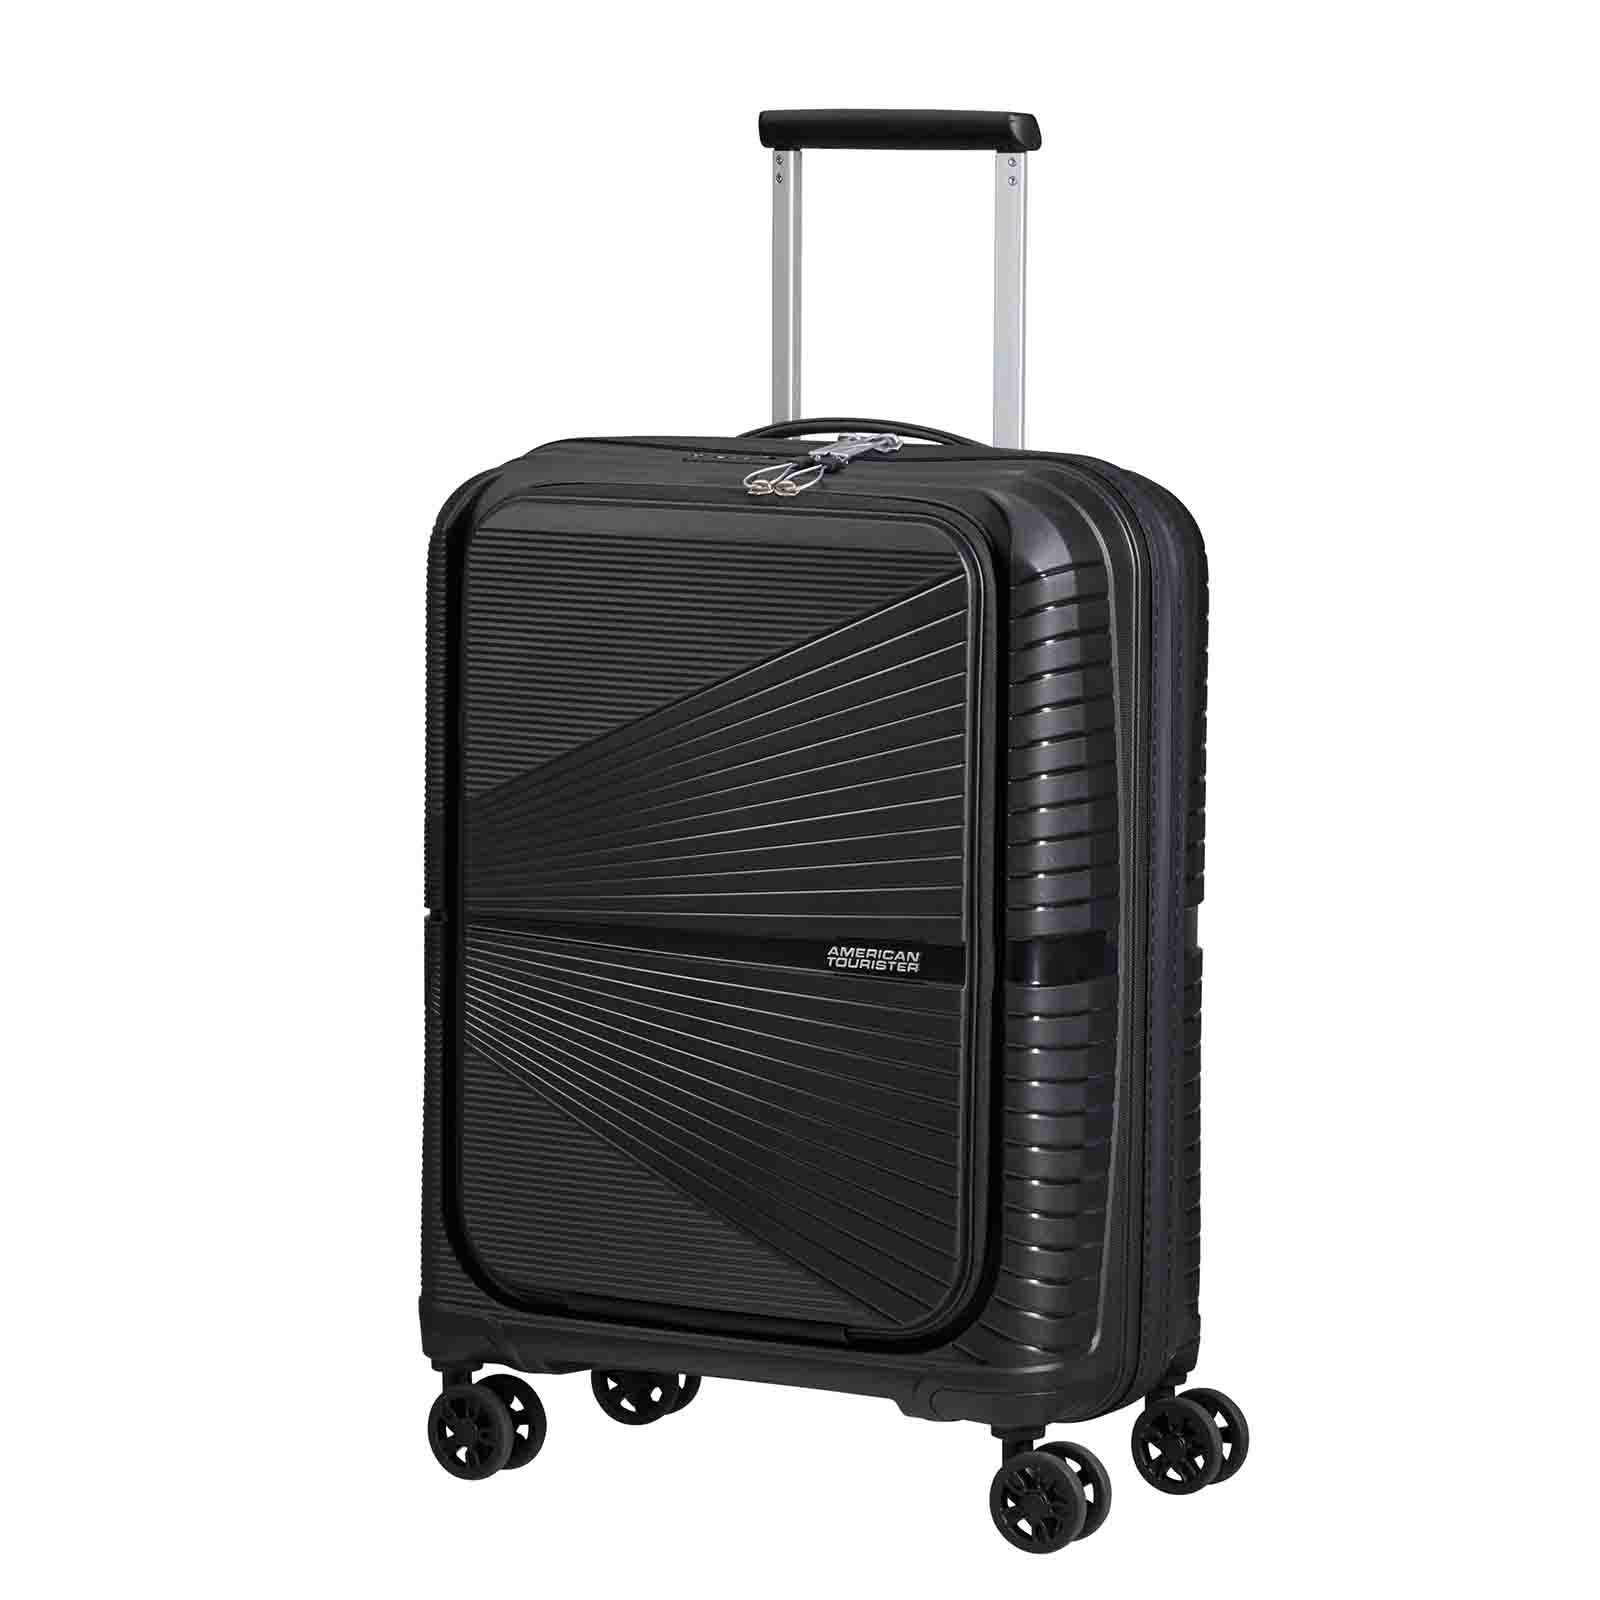 American-Tourister-Airconic-55cm-Suitcase-Front-Opening-Onyx-Black-Front-Angle